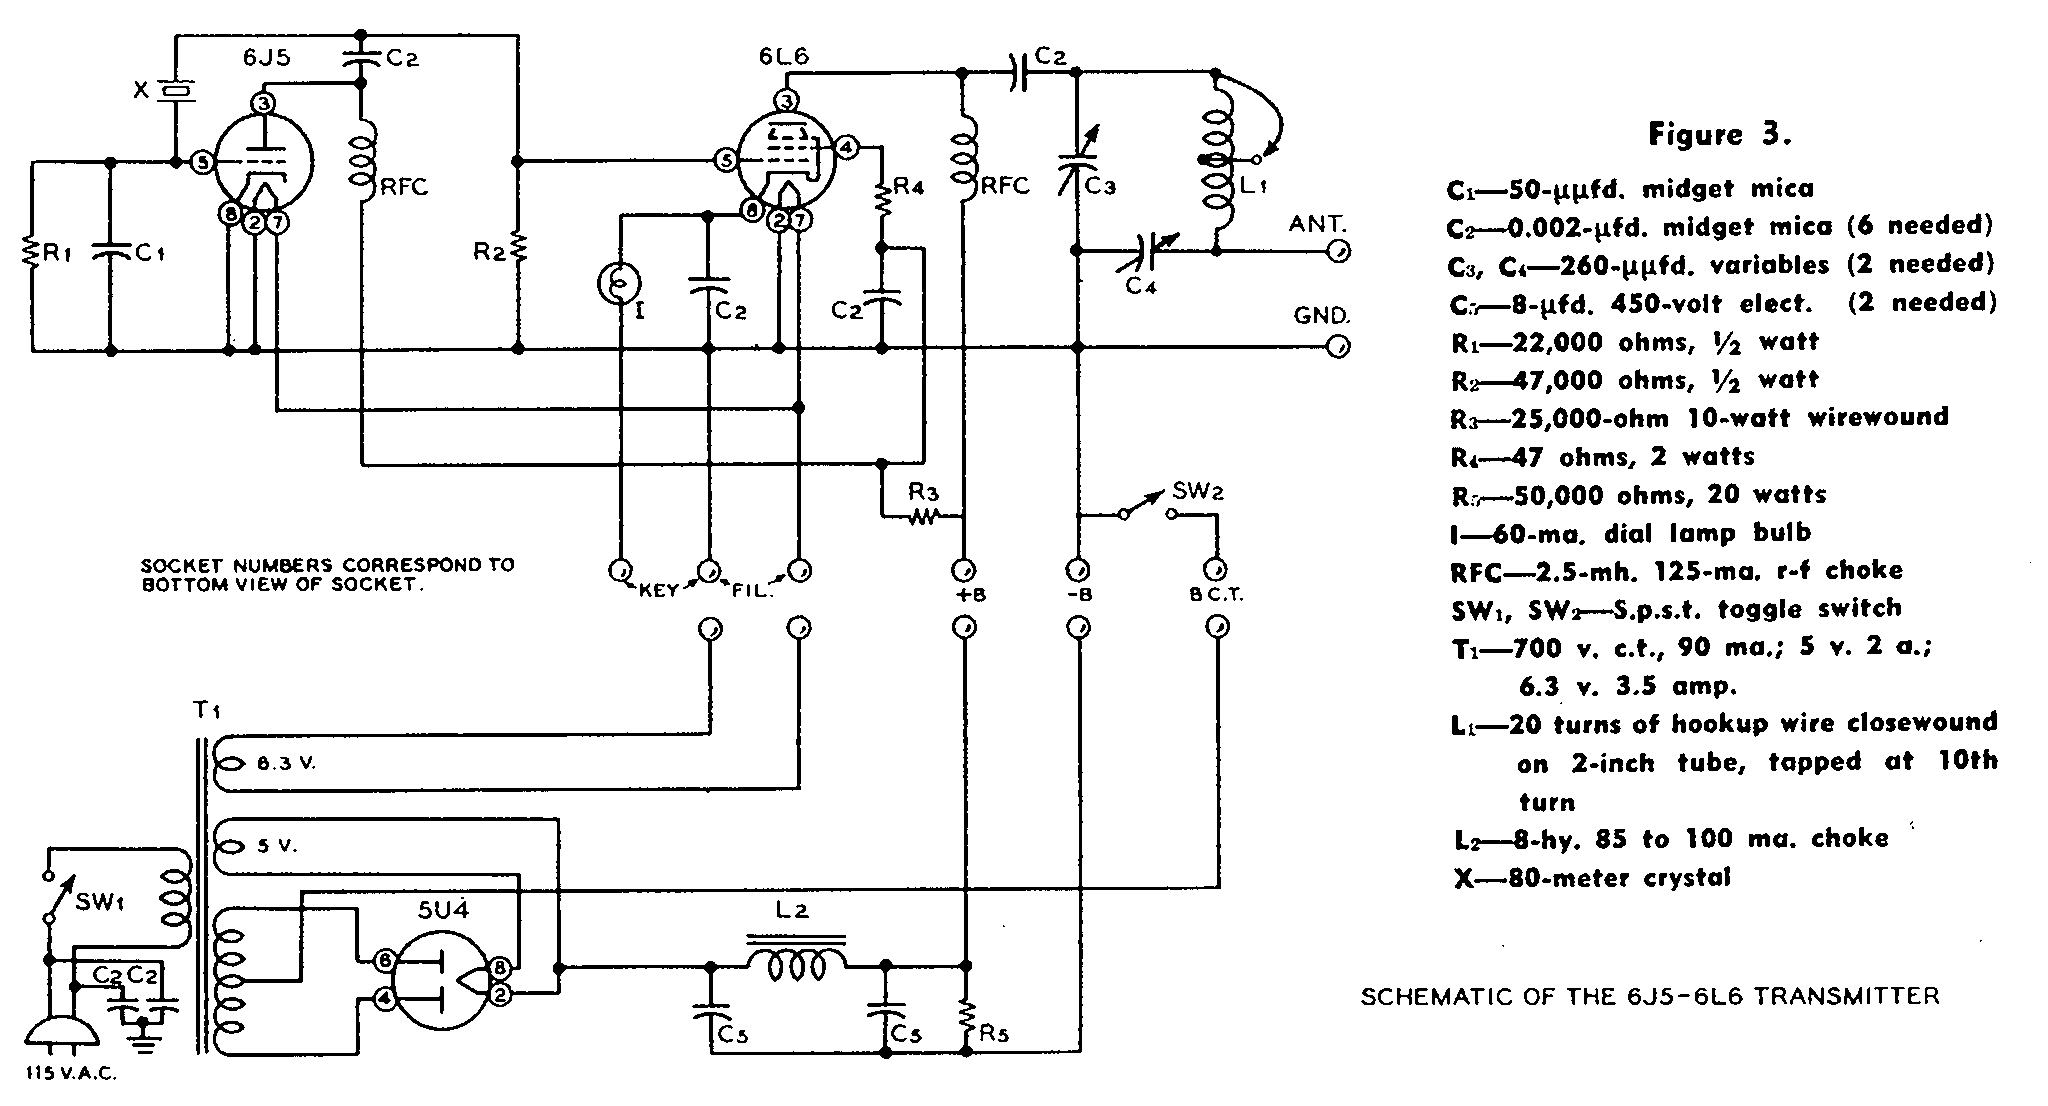 Boosted pierce transmitter schematic diagram from page 288 of the 1947 Radio Handbook.